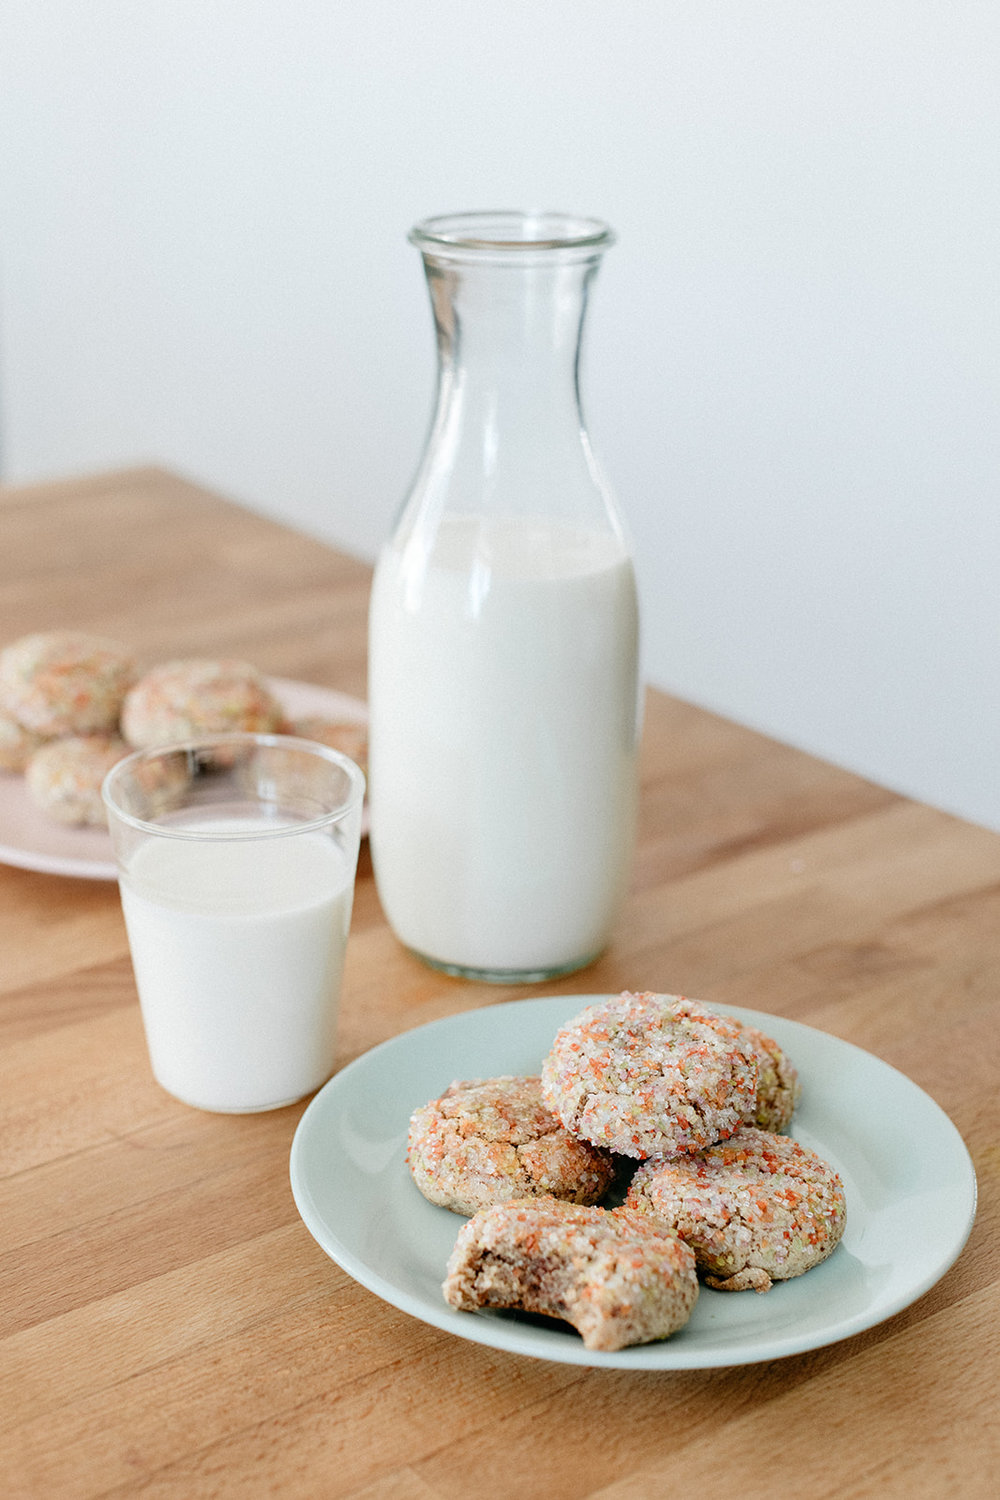 1-31-19-molly-yeh-passover-cookies-5.jpg